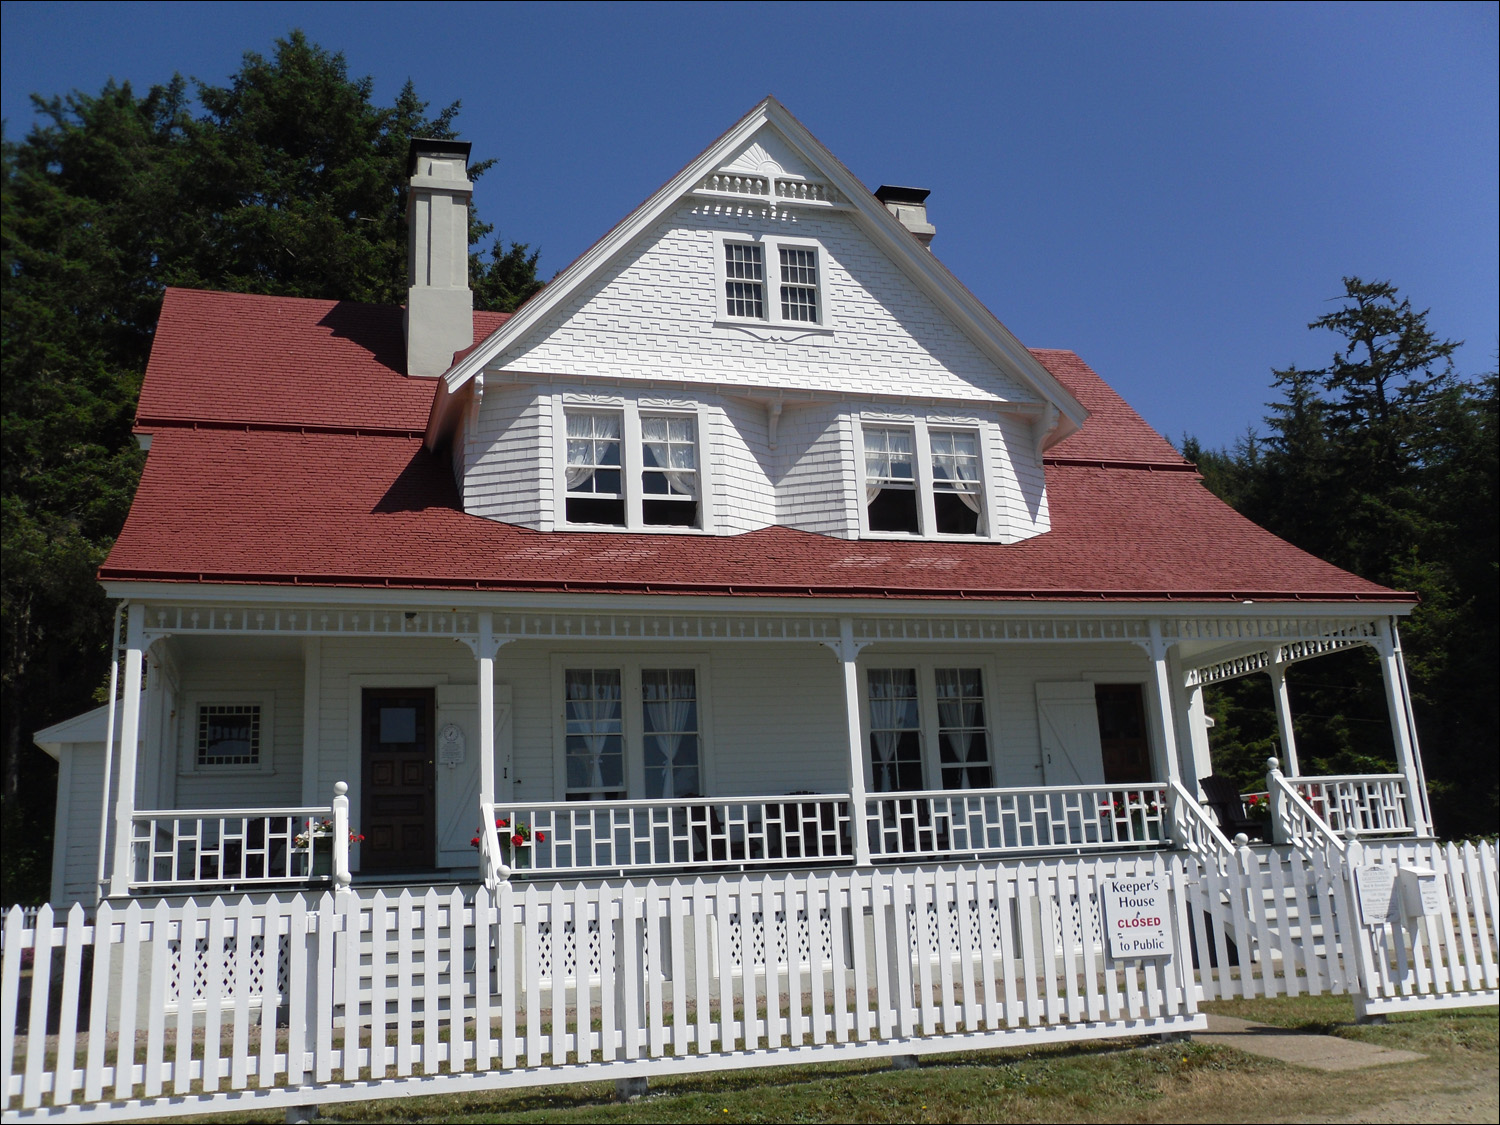 Yachats, OR- Photos taken at Heceta Lighthouse-lighthouse keeper's house, now a pricey B&B